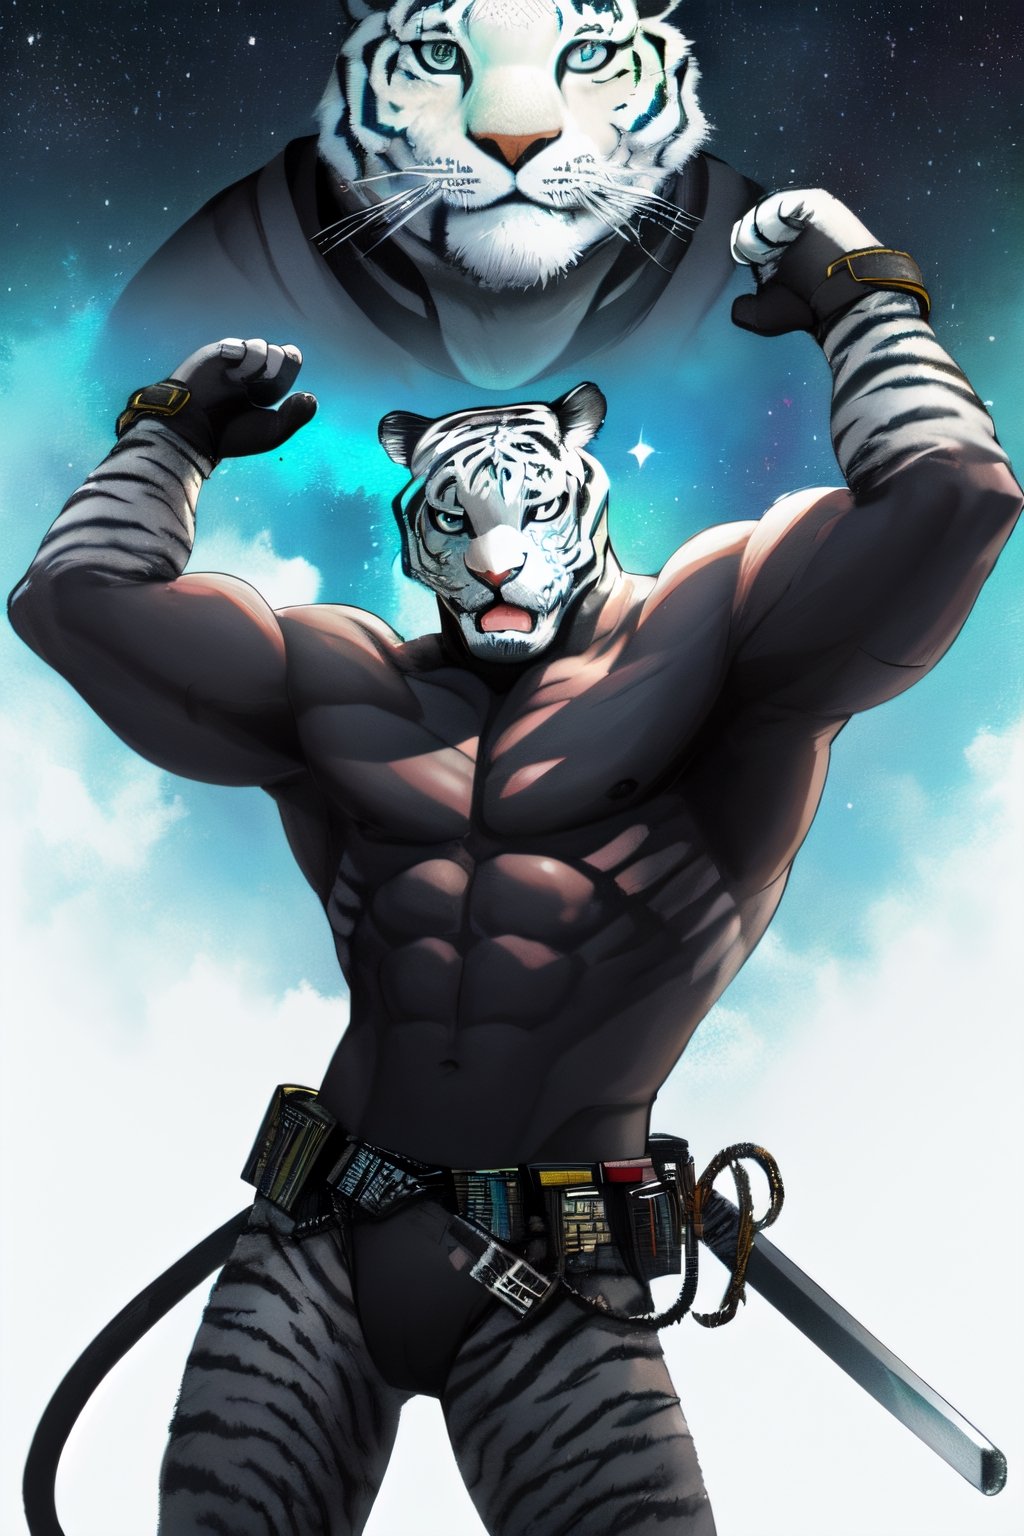 white tiger, mutant,solider,commander space, muscle body, samurai style,humanoid,army, urmah warrior,blue shirt